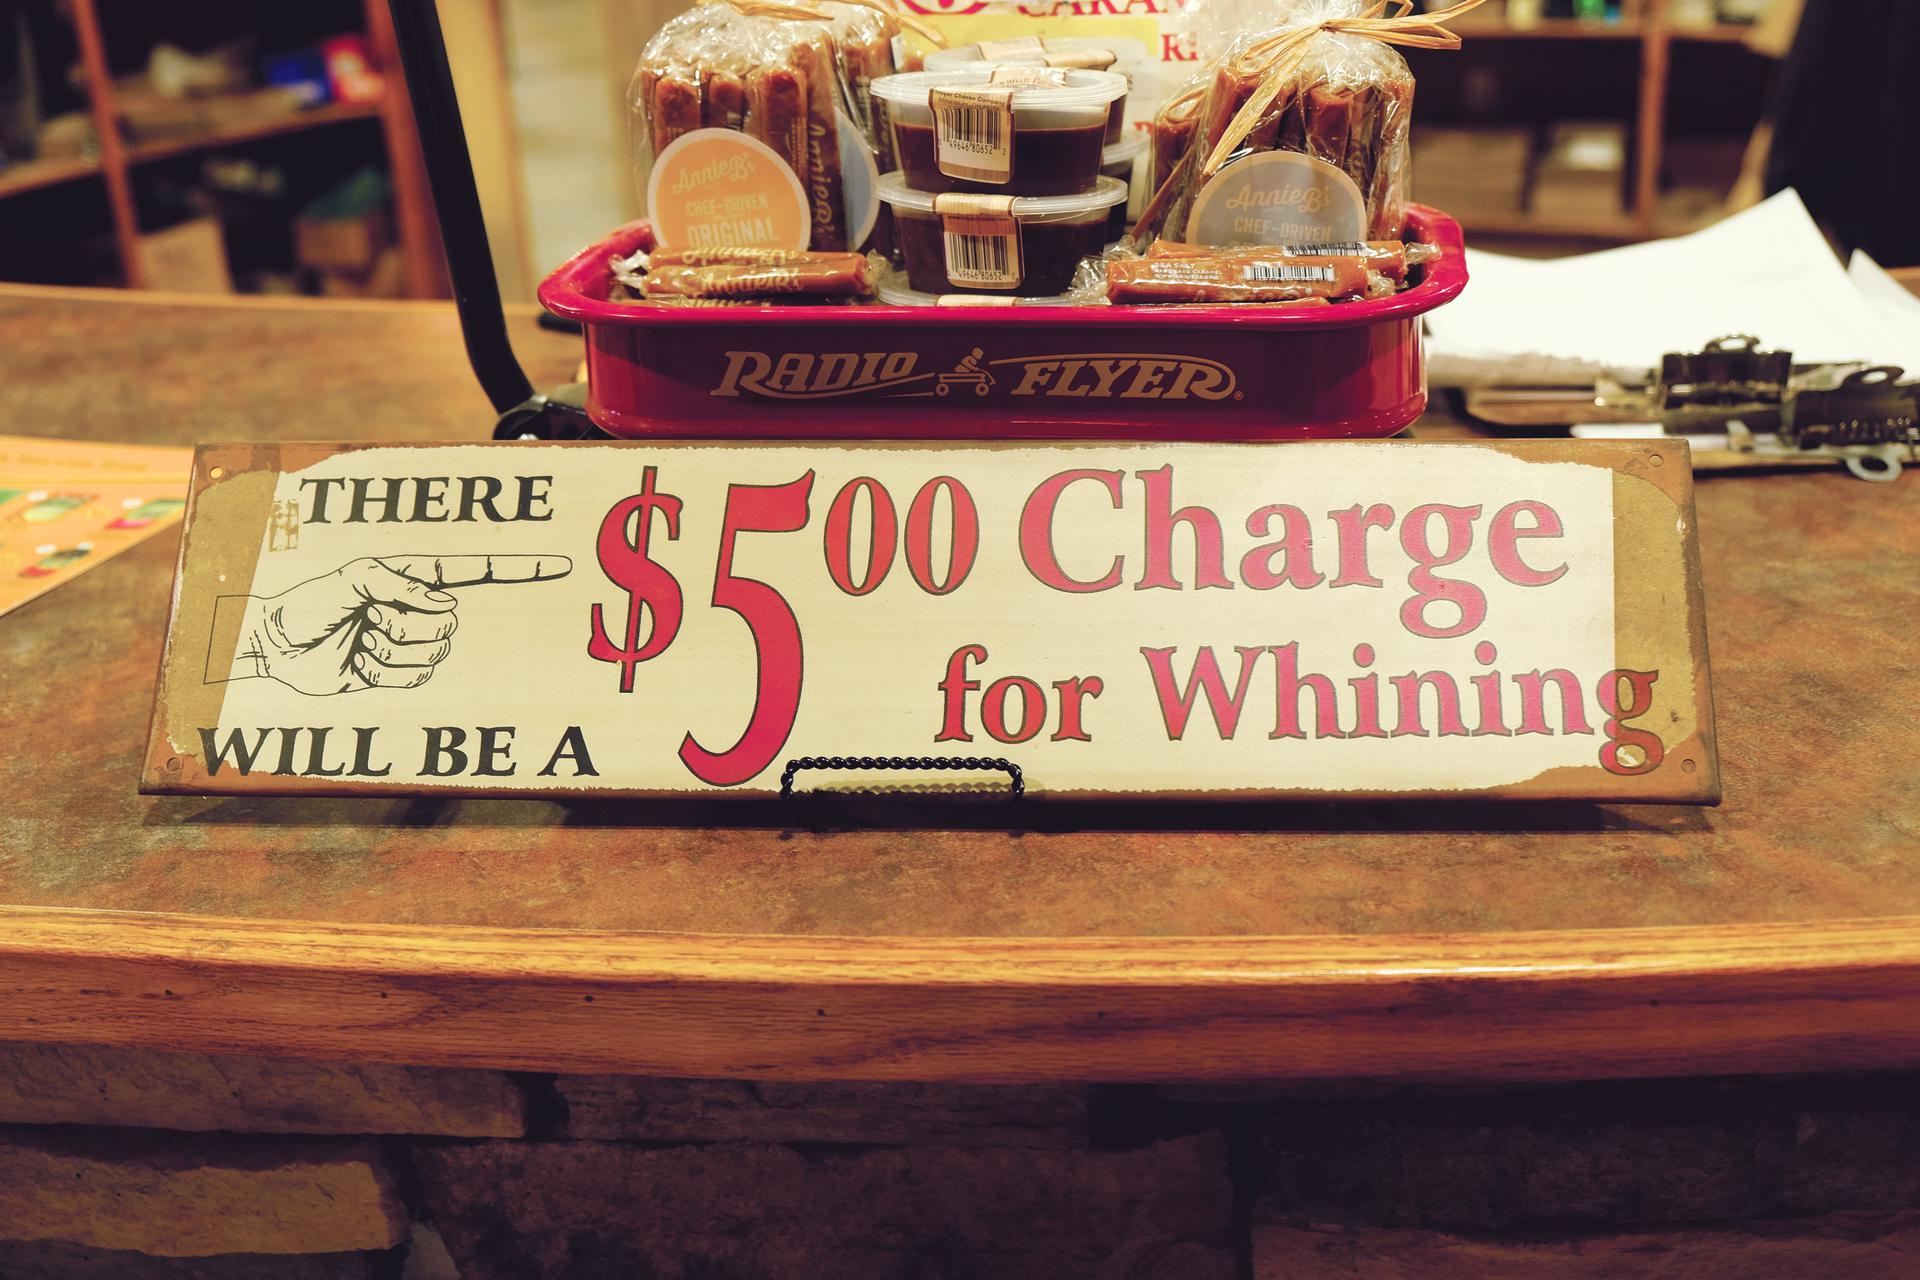 A $5 Charge for Whining.